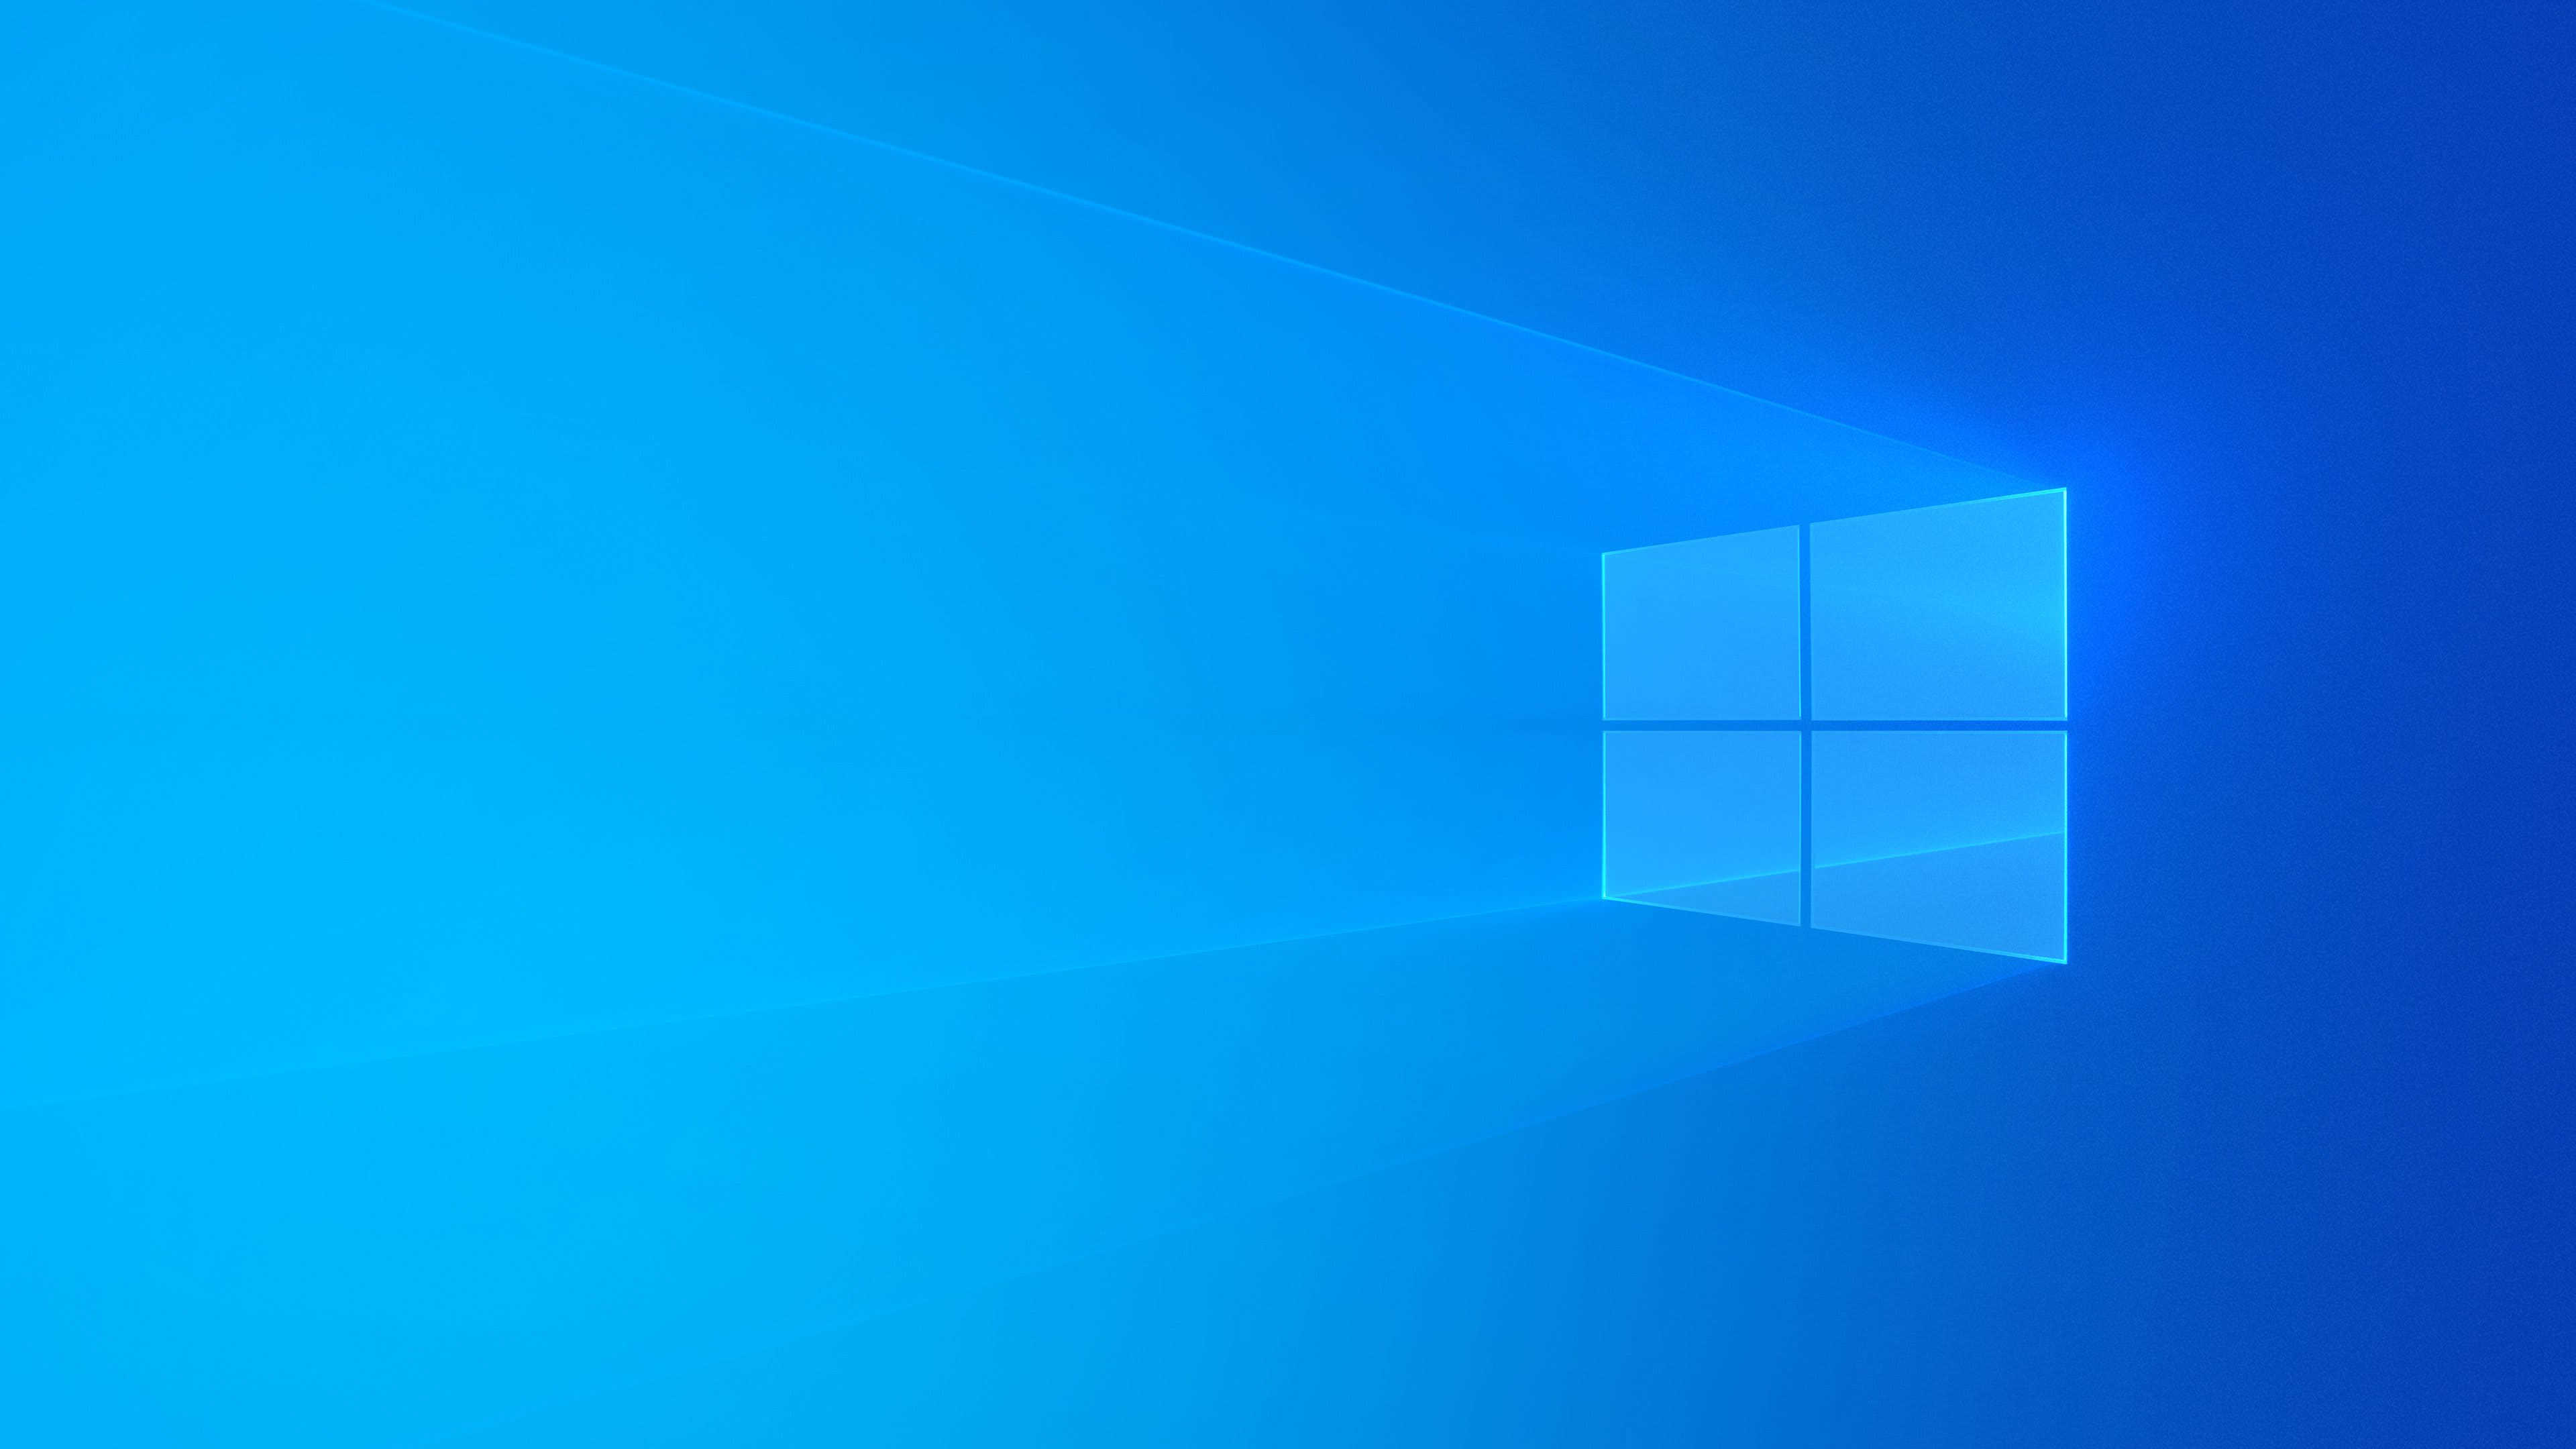 4k Wallpapers Windows 10 Discount, SAVE 53%.